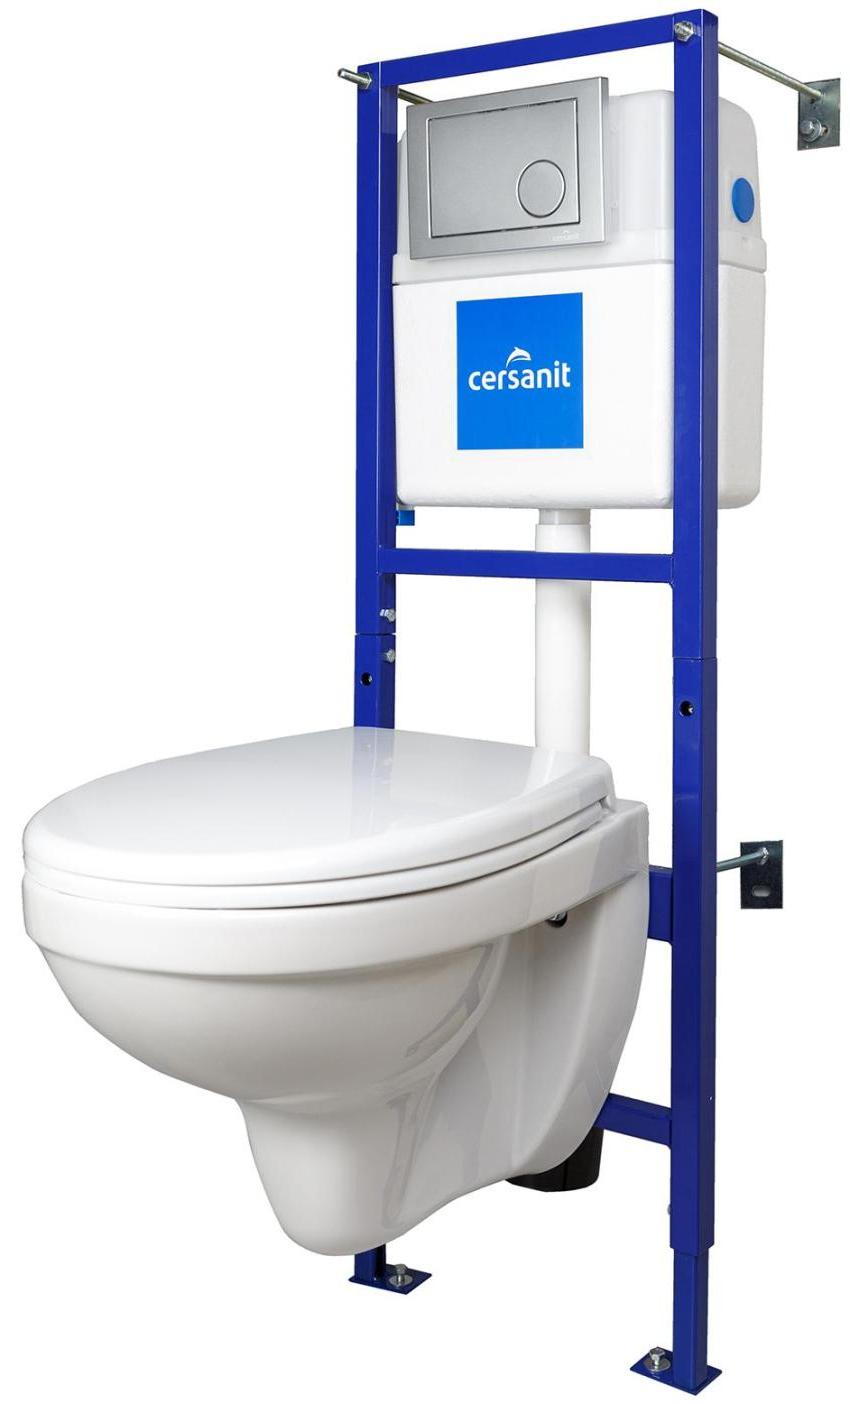 The dimensions of the frame-type toilet are usually 50-60 cm